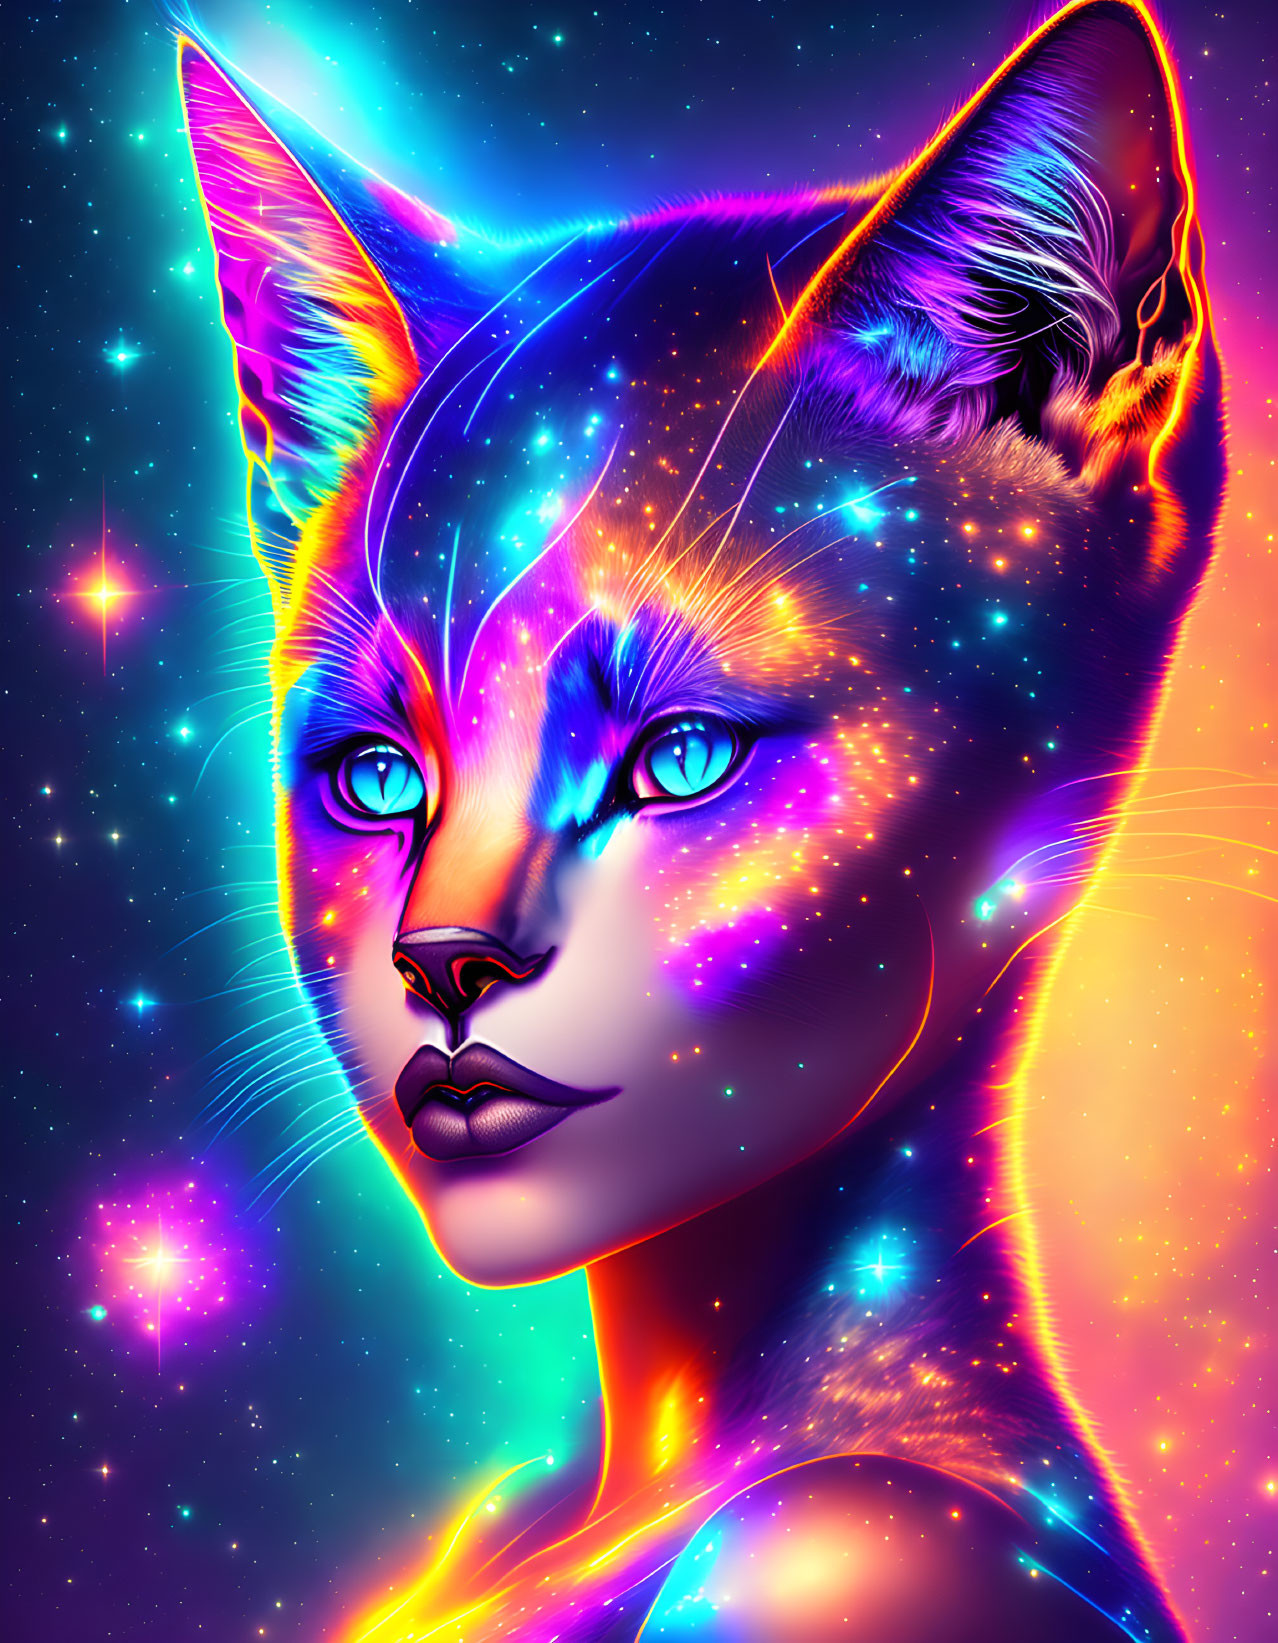 Digital artwork: Woman's face merges with cat in cosmic scene